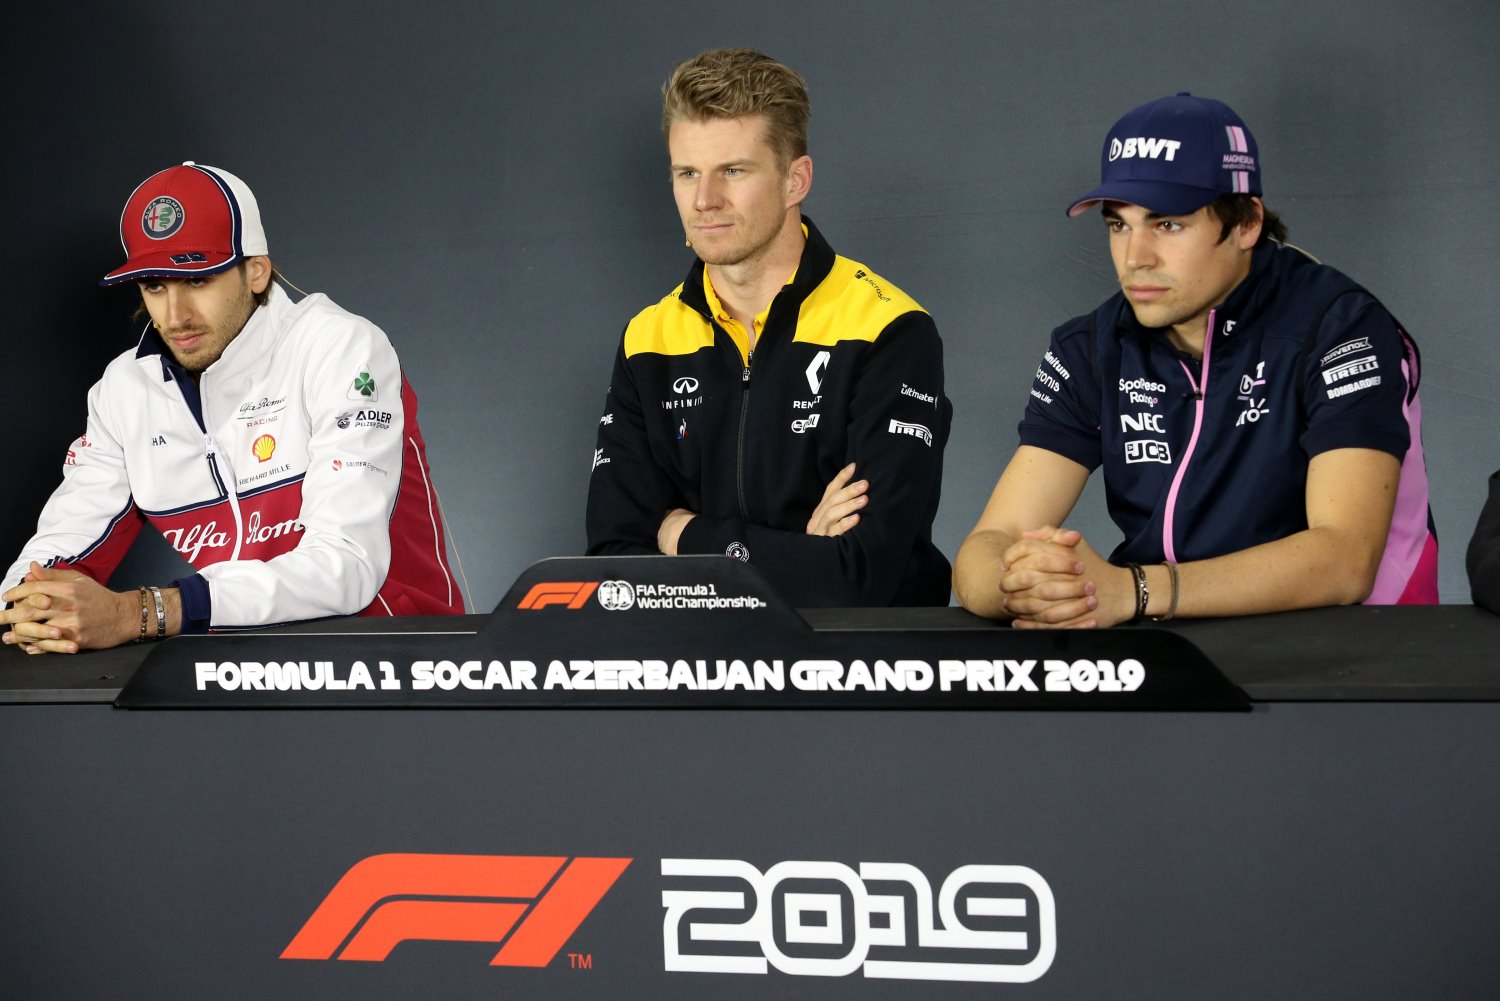 From left, Giovinazzi, Hulkenberg and Stroll